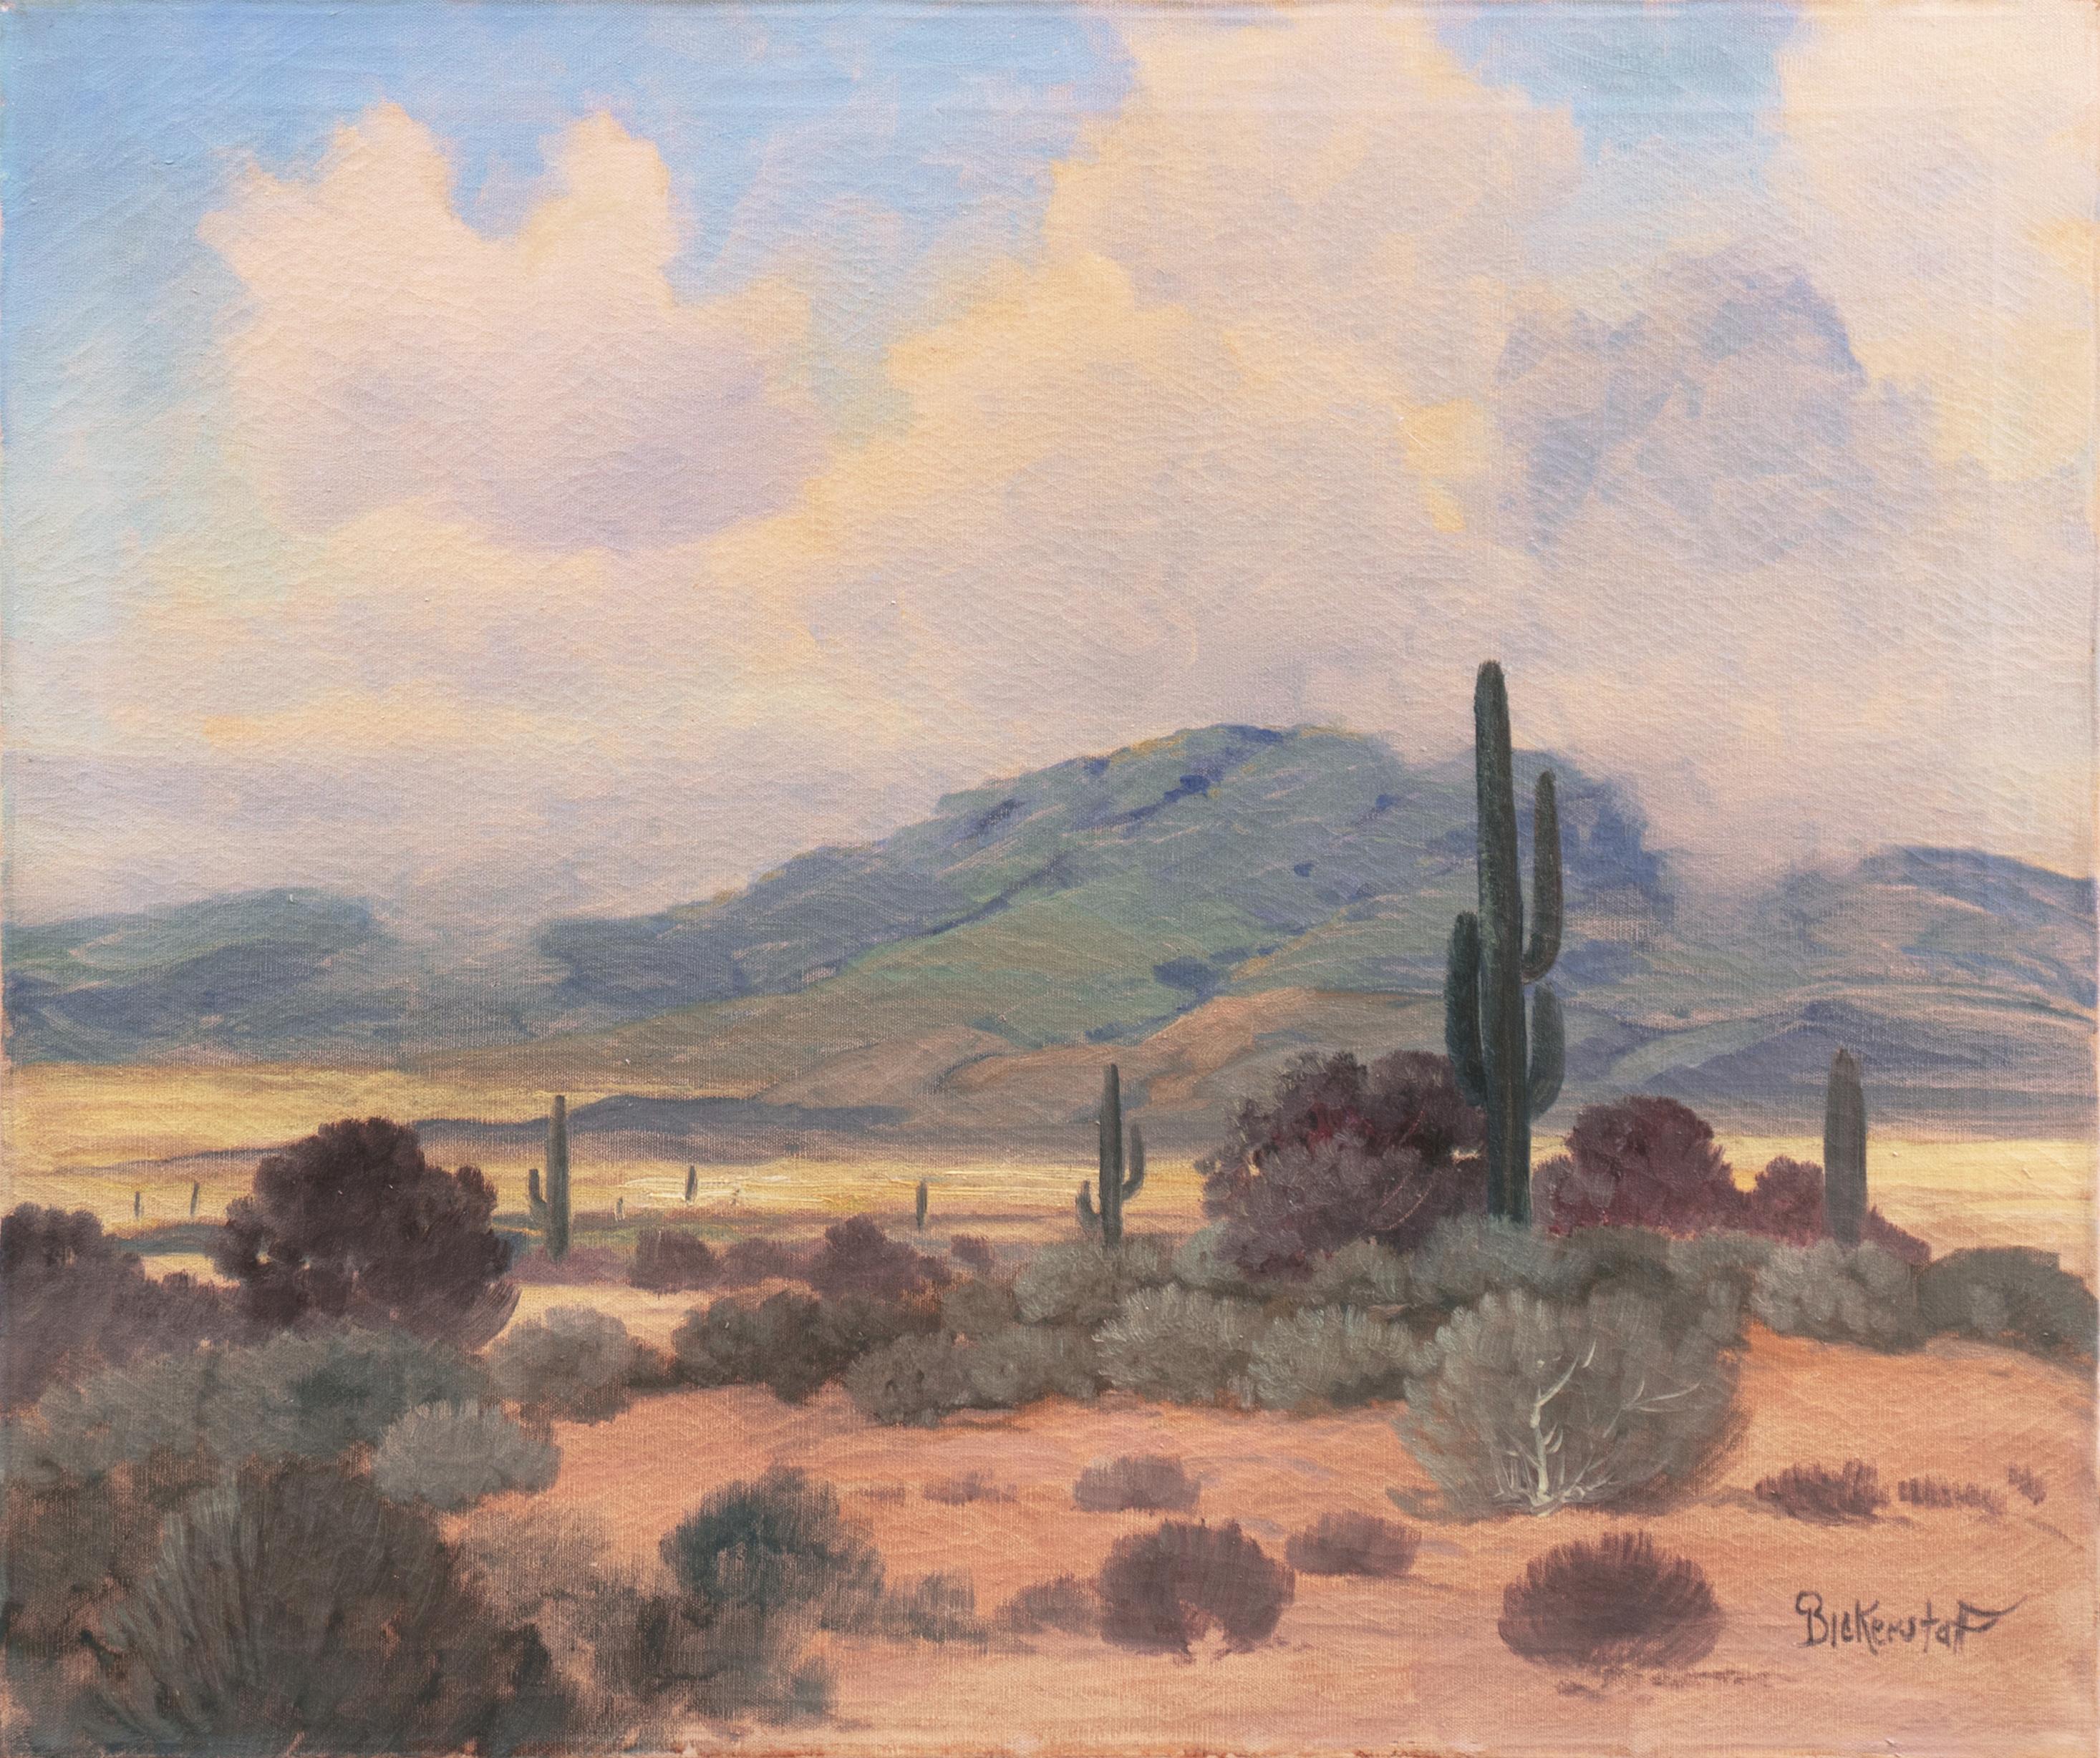 George Sanders Bickerstaff Landscape Painting - 'Southern California Desert Landscape', Art Institute of Chicago, Who Was Who